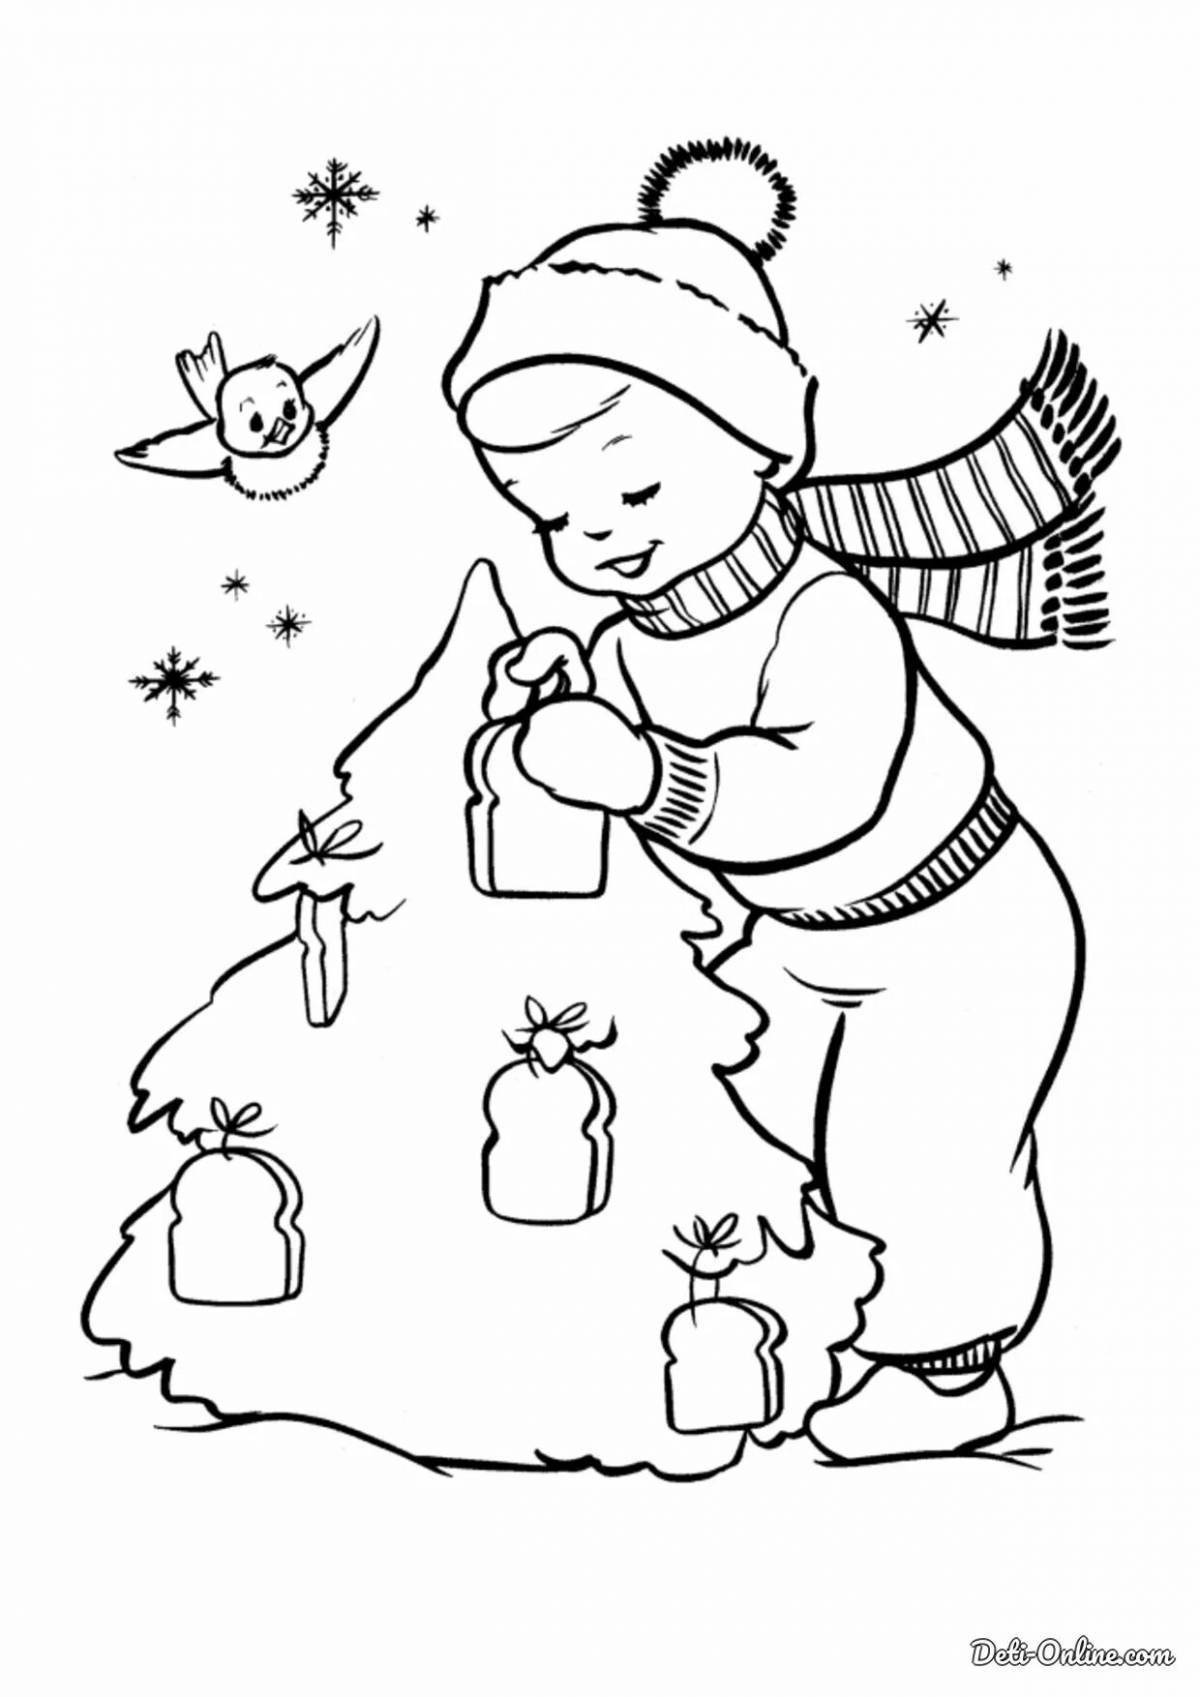 Outstanding Christmas coloring book for boys